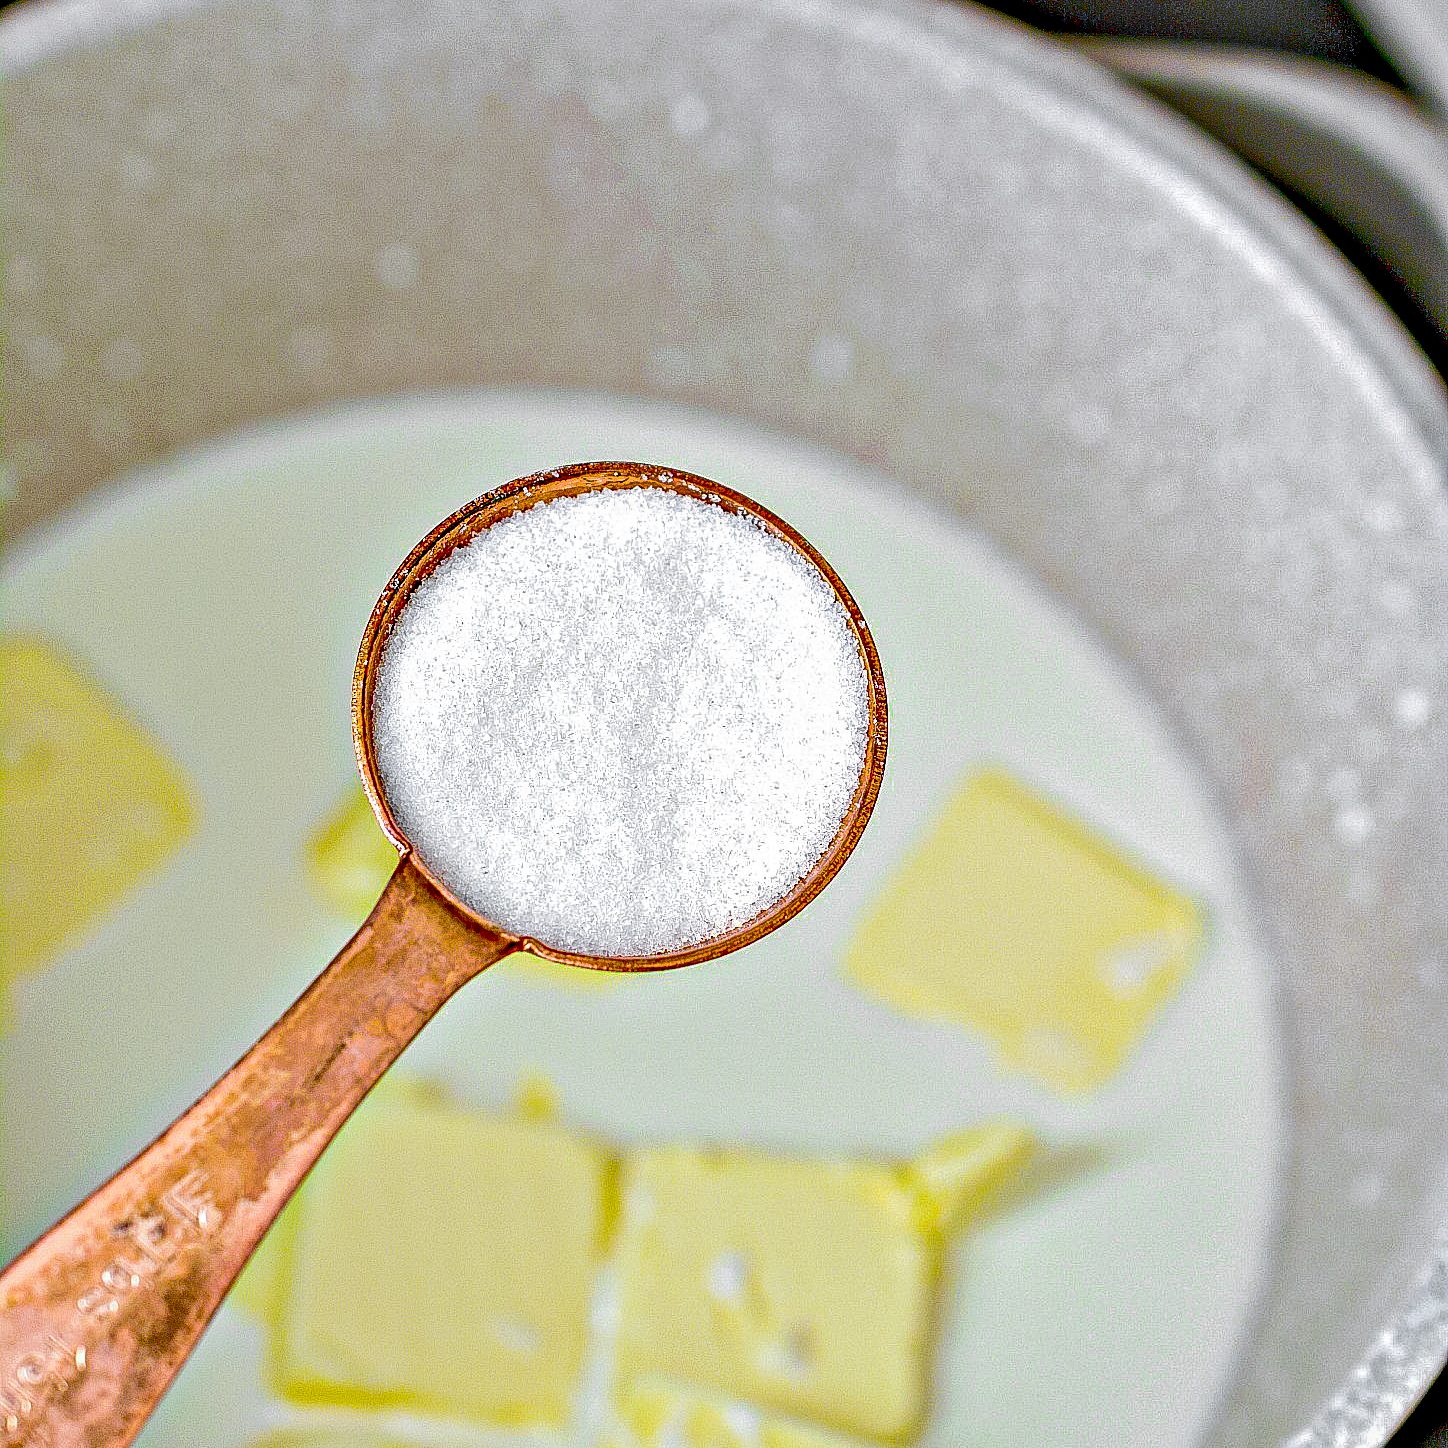 In a saucepan over low heat, add the water, half and half, 8 tbsp butter cut into pieces, salt and sugar. Cook over low heat, stirring often until the butter and sugar are completely melted.